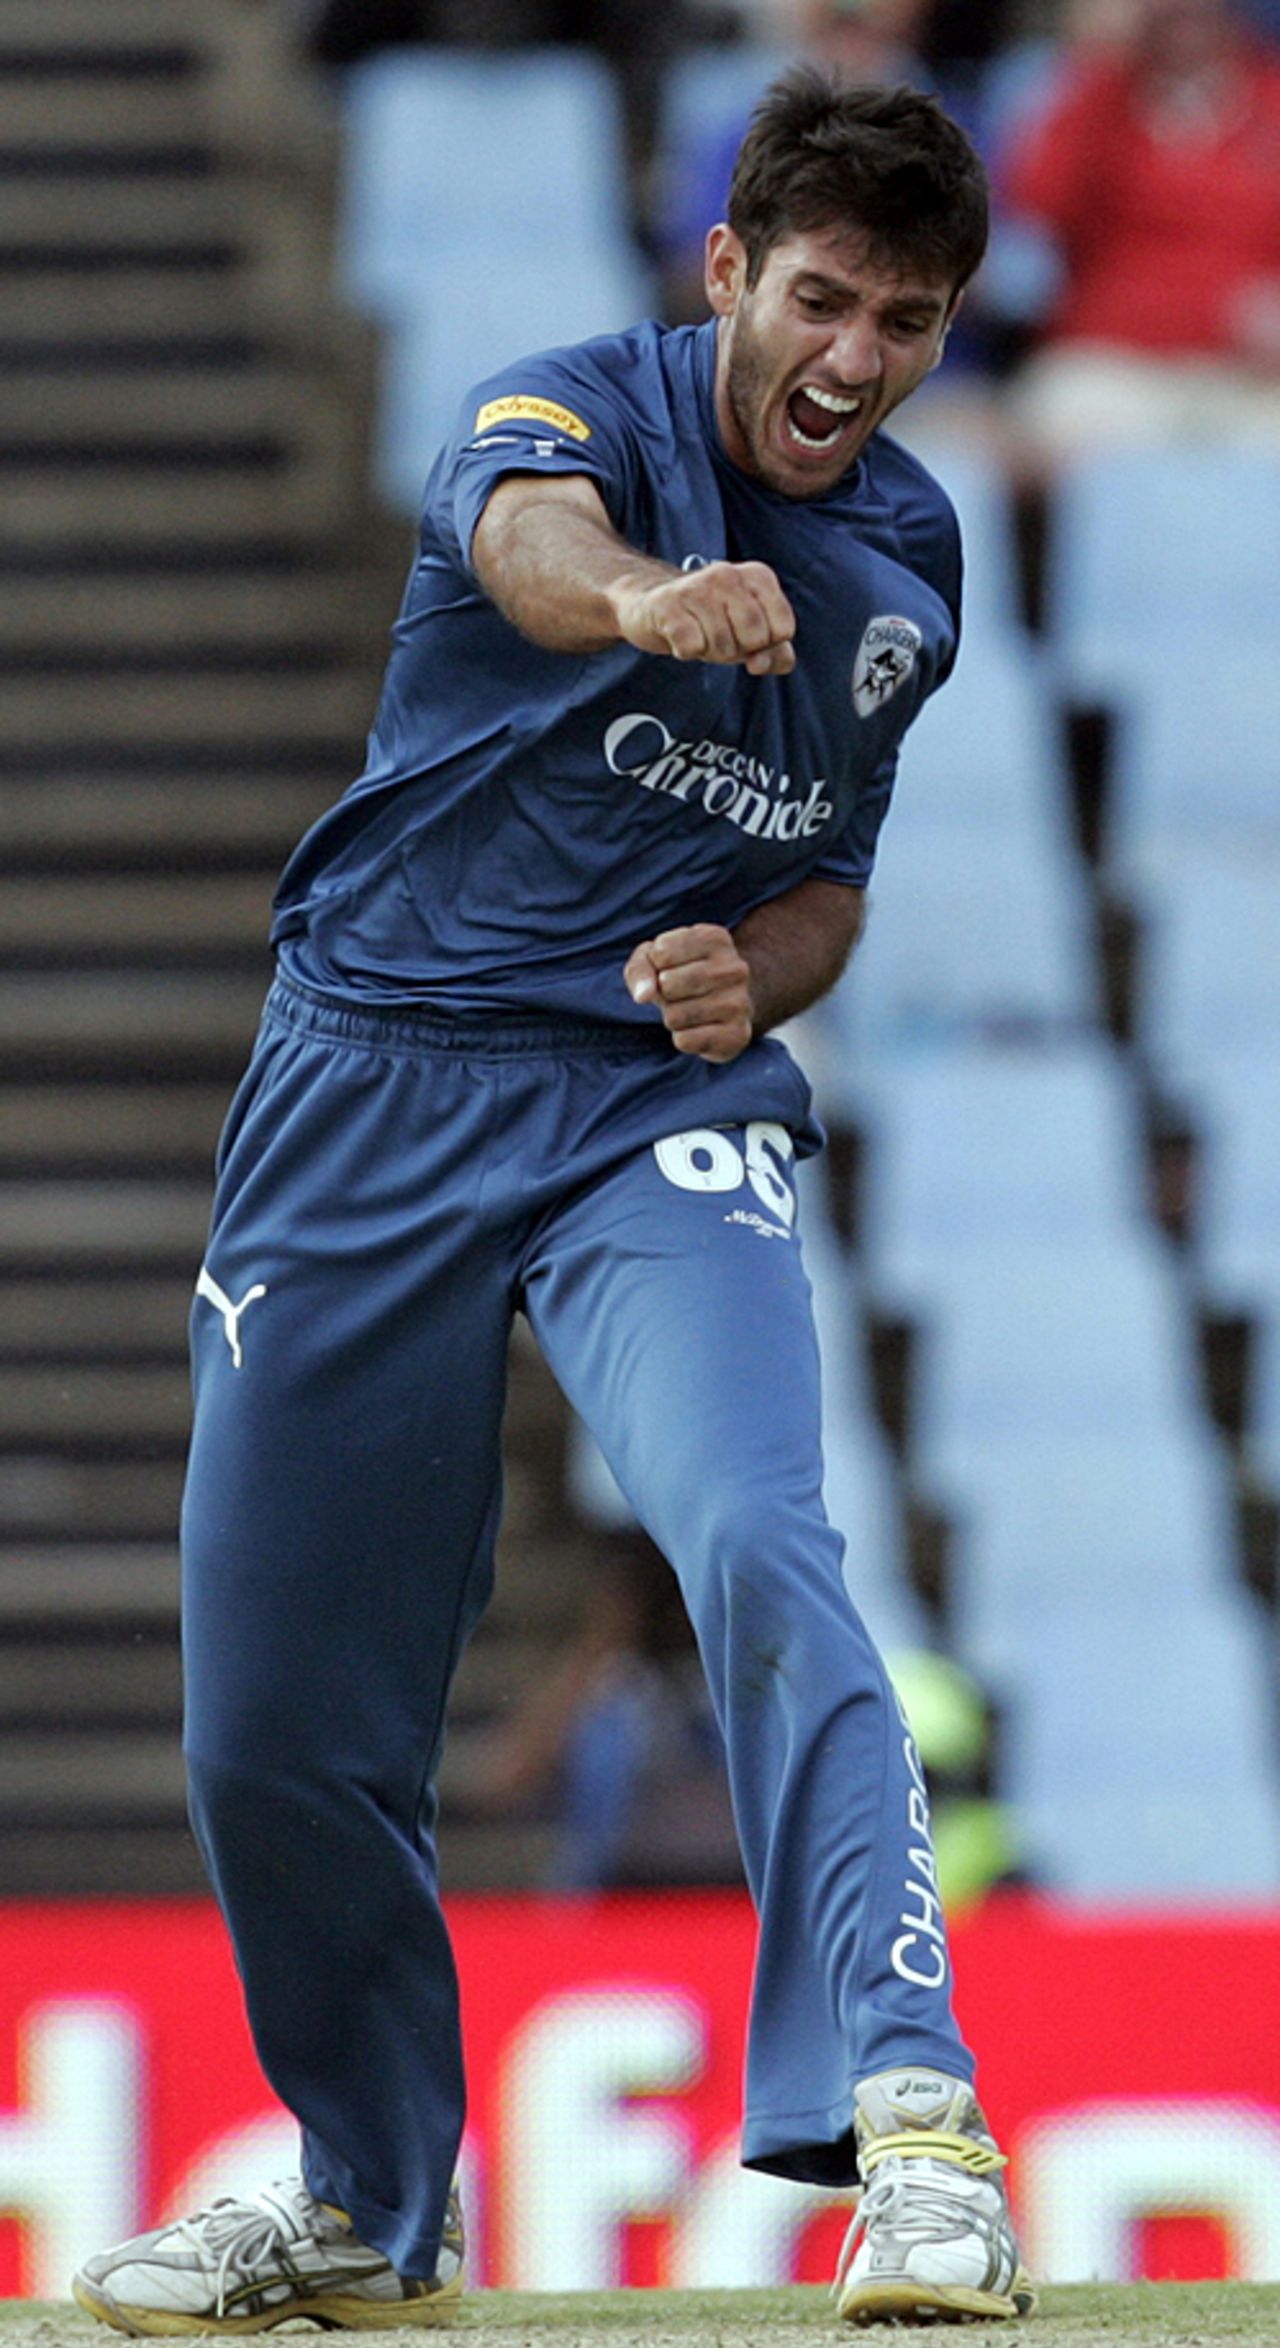 Shoaib Ahmed picked up the crucial wickets of Gautam Gambhir and AB de Villiers, Deccan Chargers v Delhi Daredevils, IPL, 21st match, Centurion, April 30, 2009